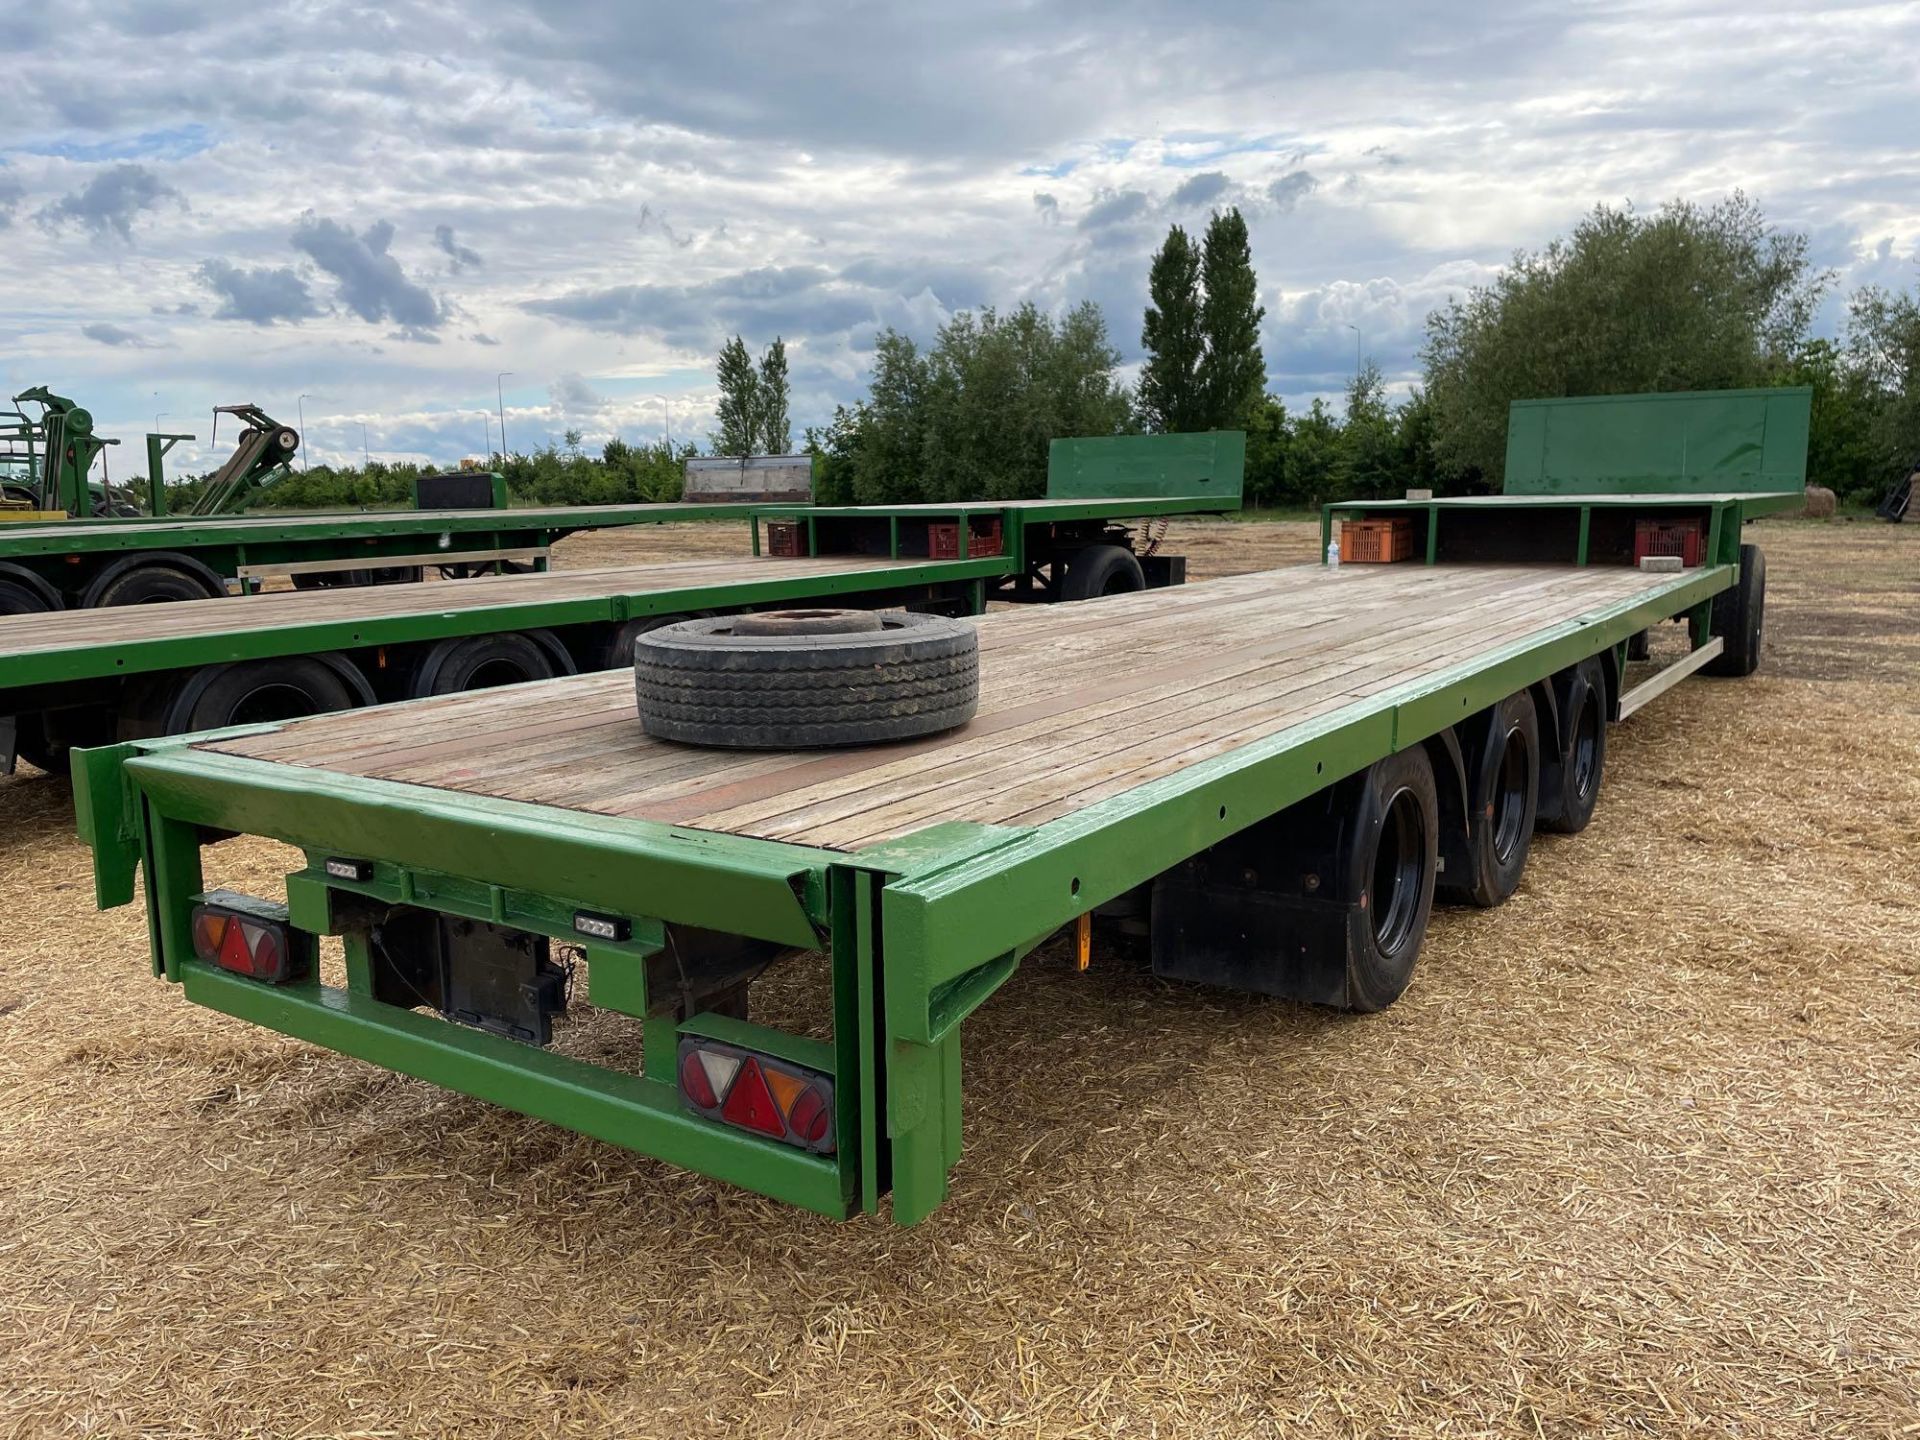 38ft swan neck bale trailer, wooden floor, air brakes, tri-axle on 265/70R19.5 wheels and tyres c/w - Image 5 of 6